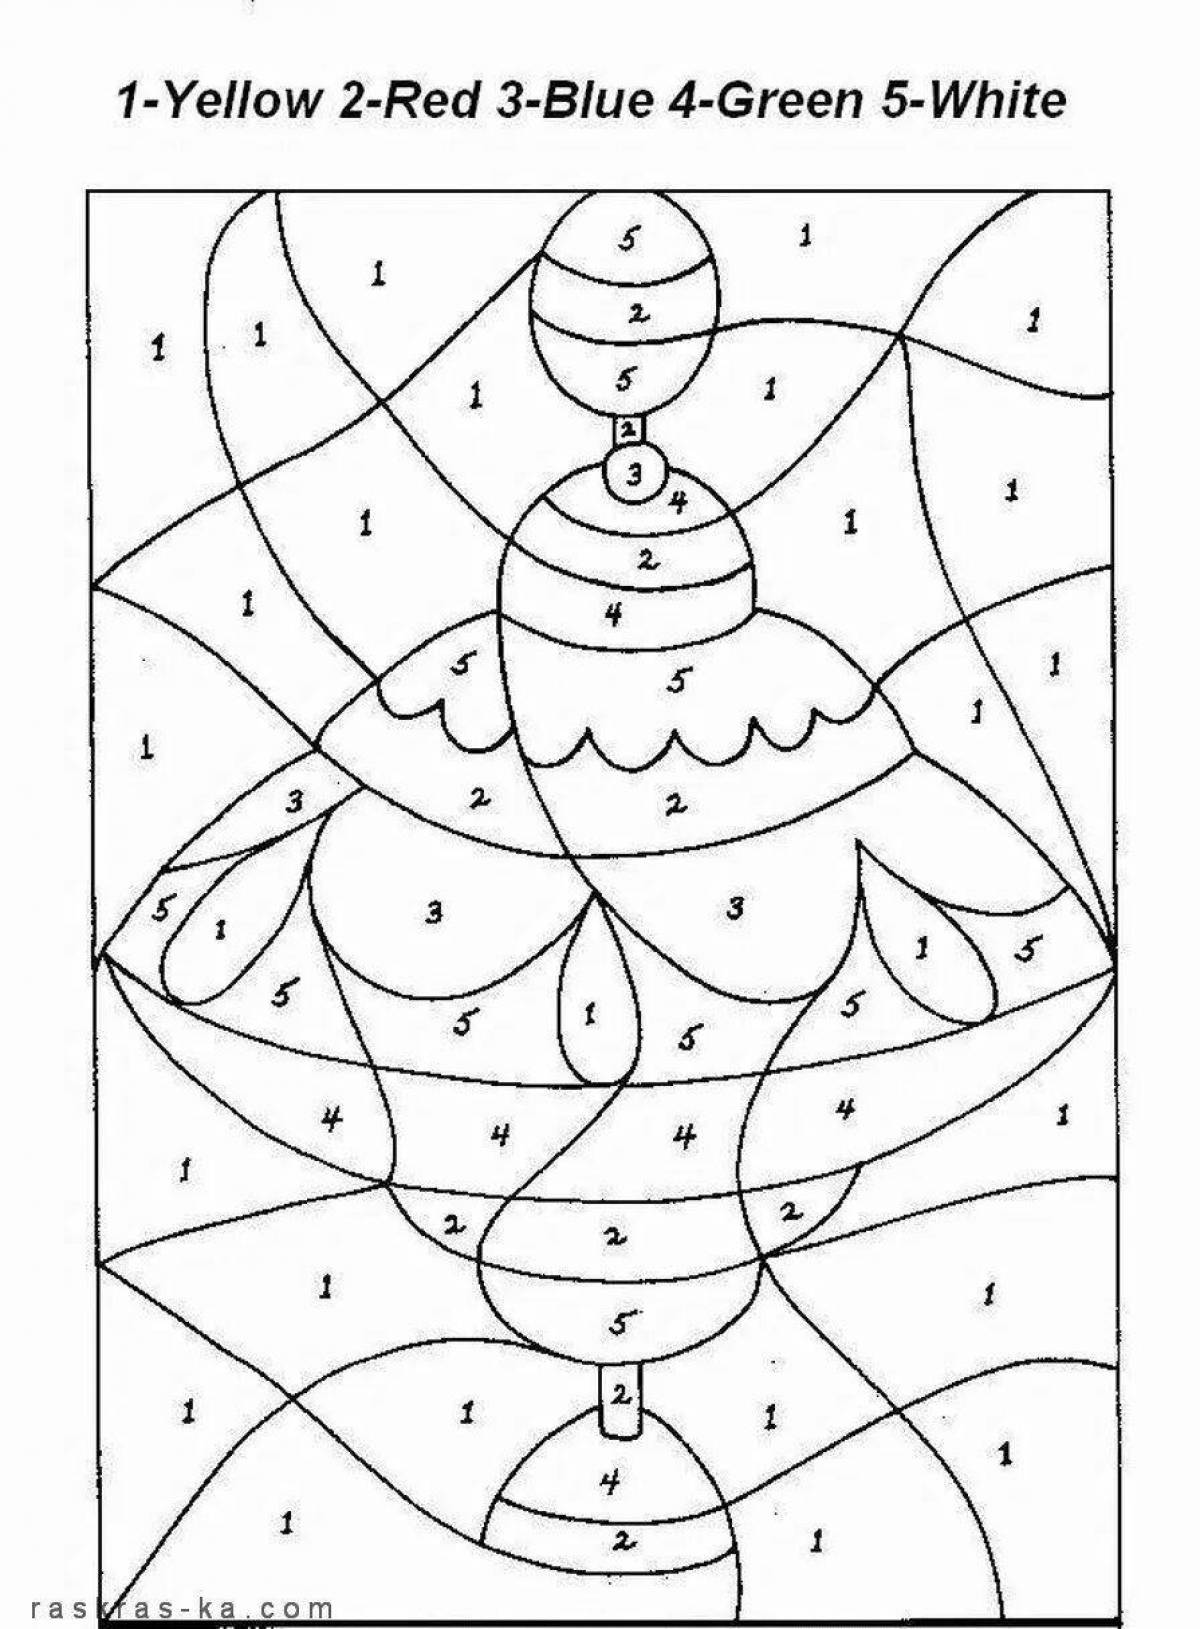 Colorful-journey 7 years by numbers coloring page